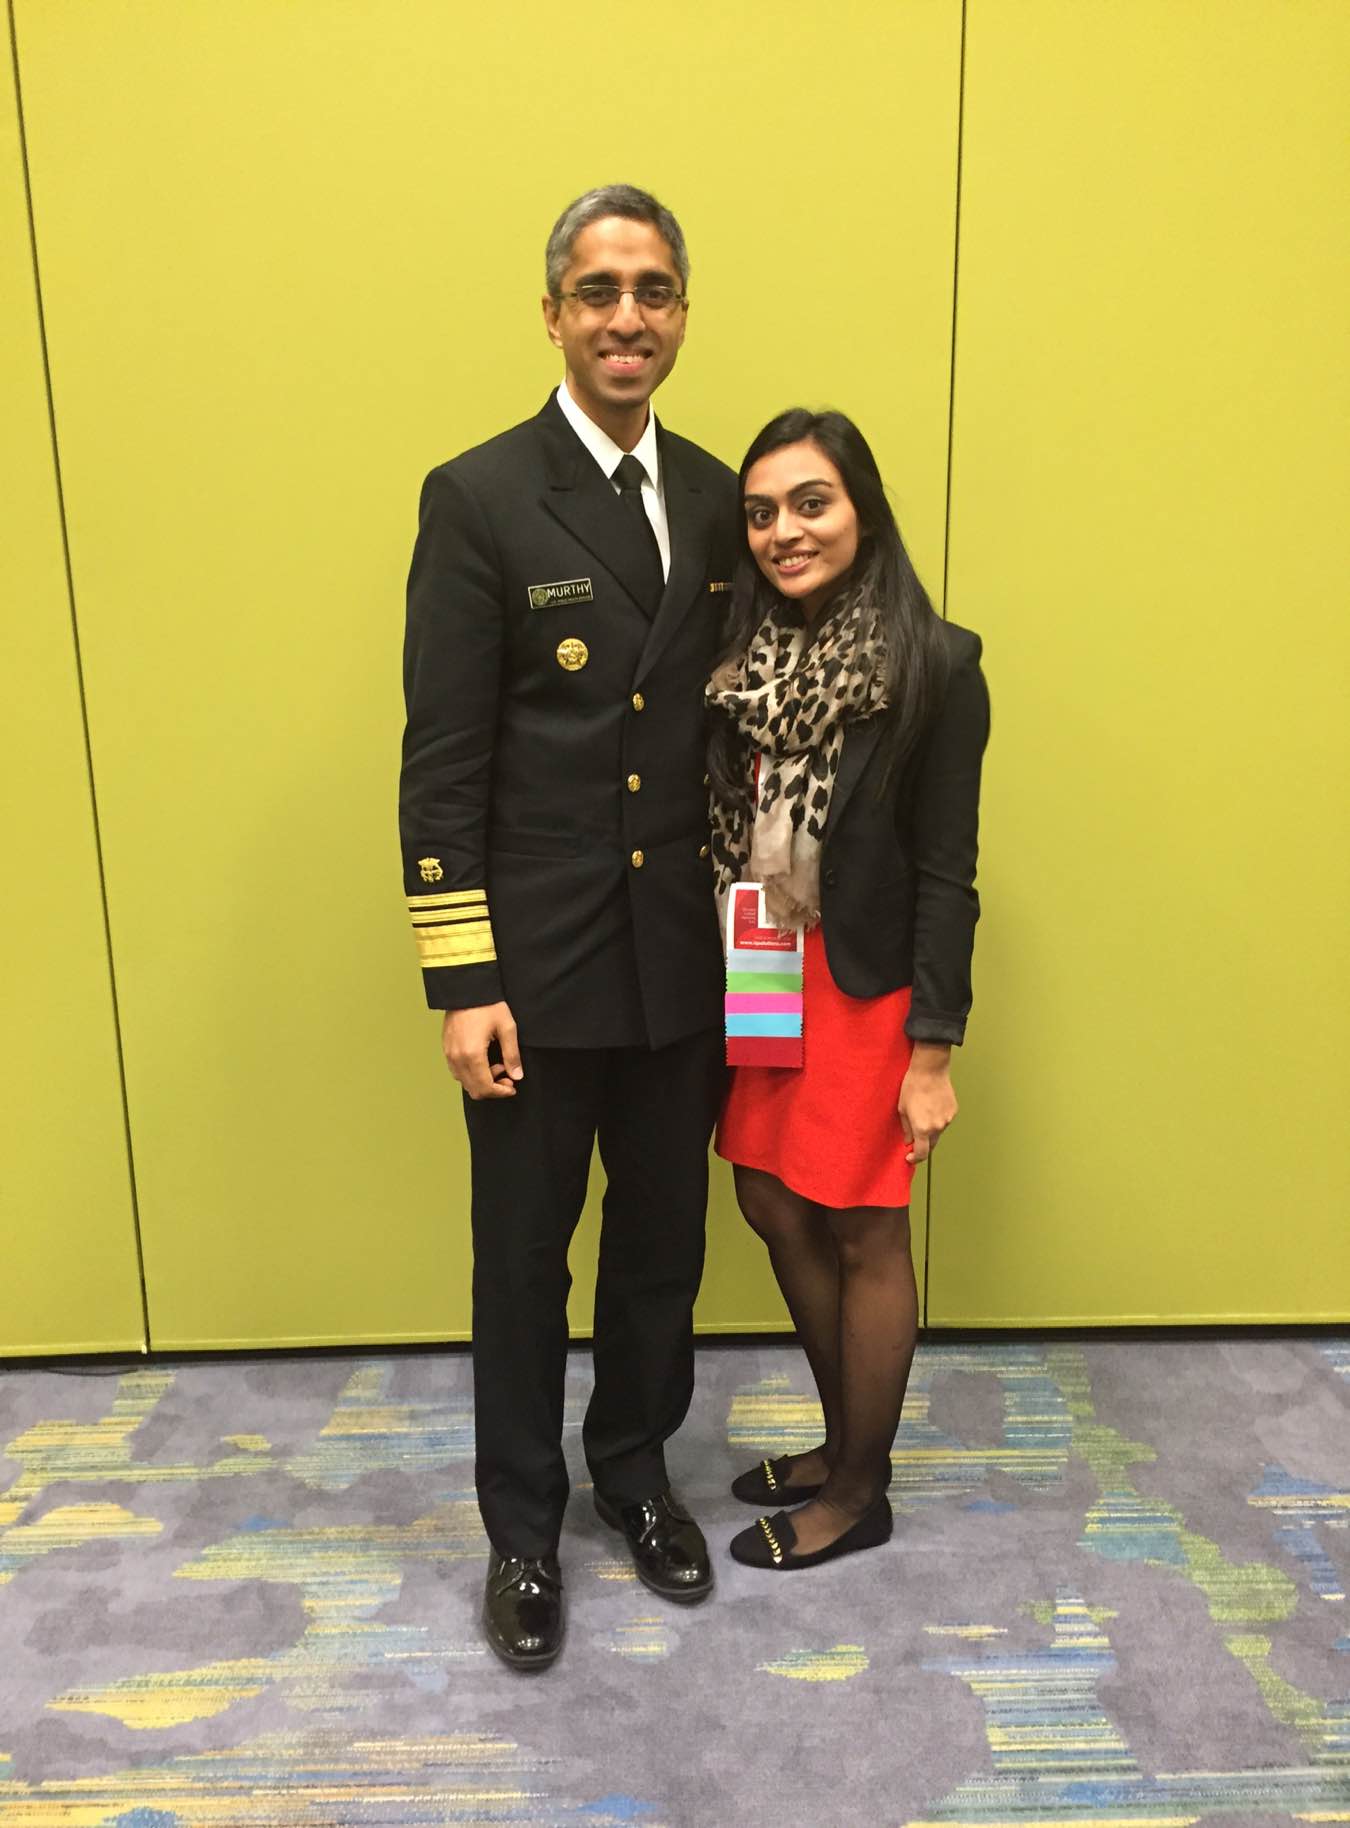 While at the American Public Health Association (APHA) 2015 Annual Meeting in Chicago, Kushali Amin, MPH ’16, met Vivek Murthy, MD, surgeon general of the United States. 